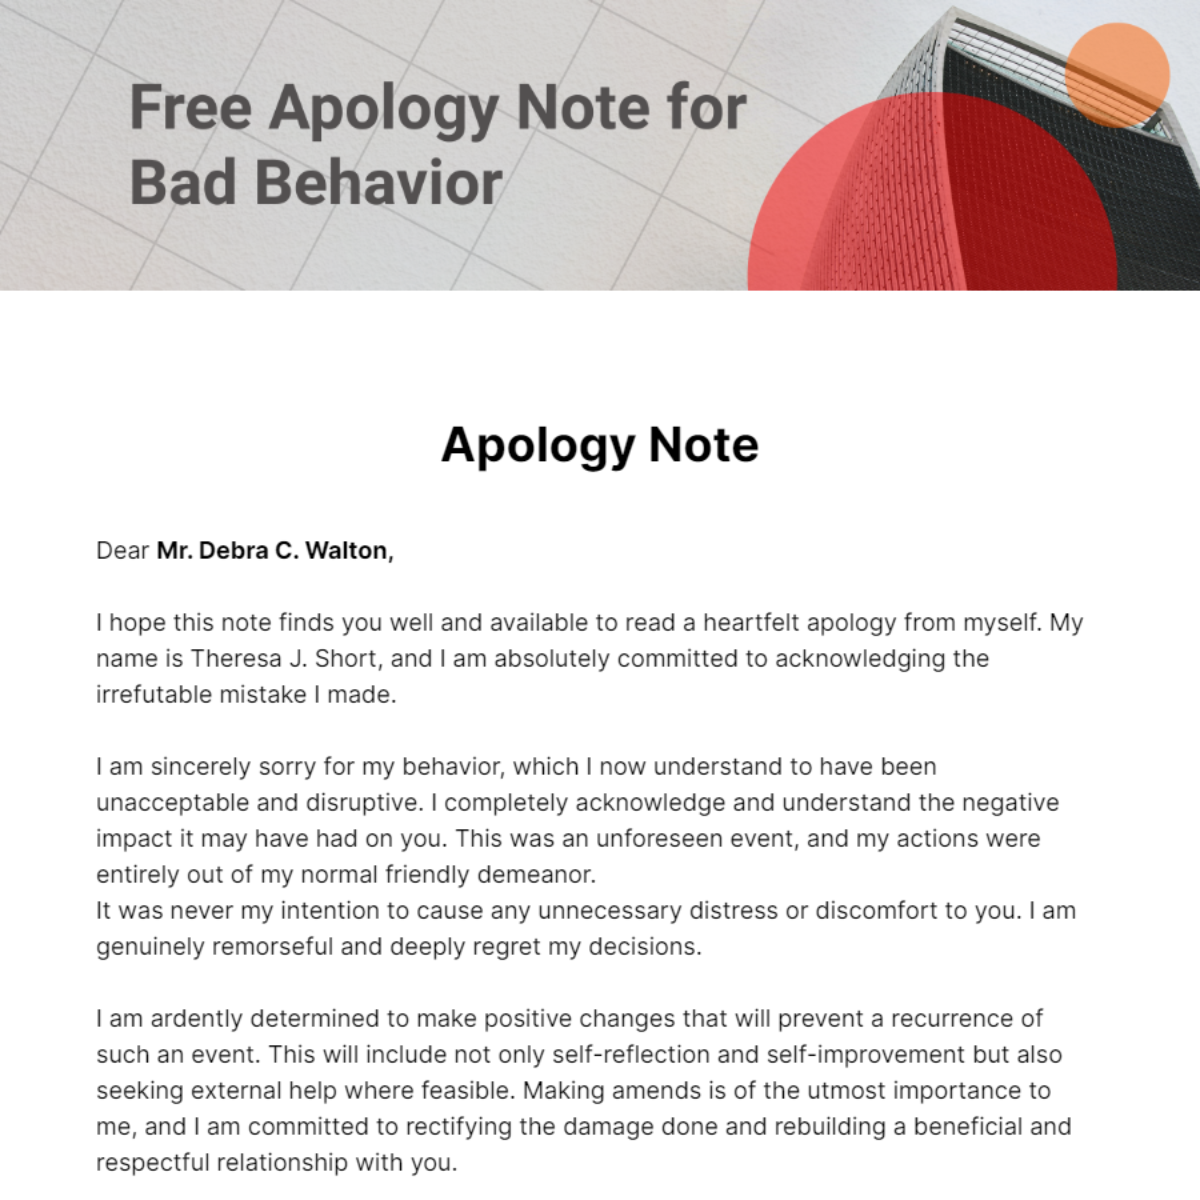 Apology Note for Bad Behavior Template